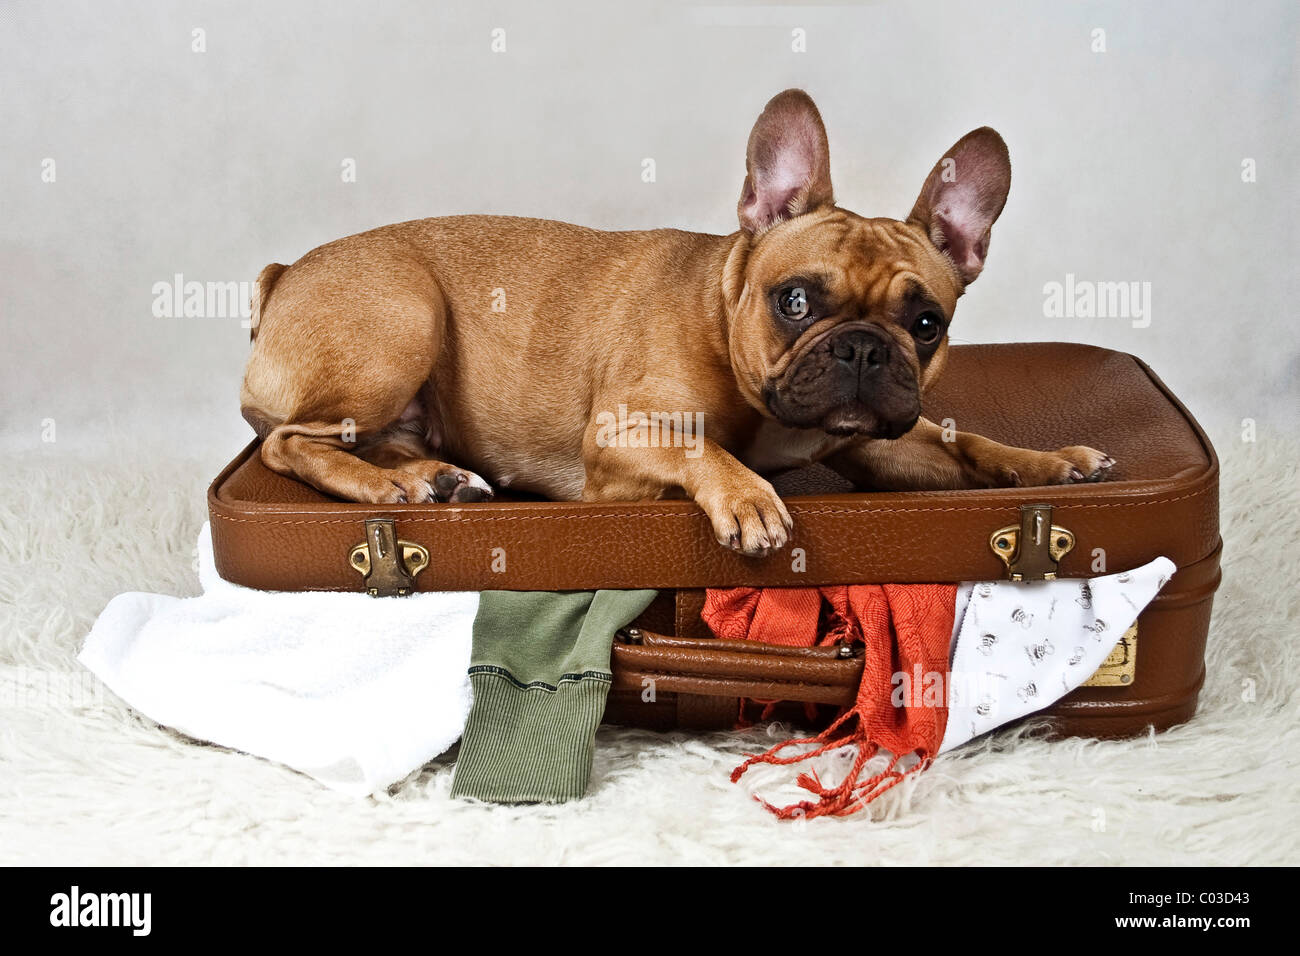 French bulldog lying on a messily packed suitcase Stock Photo - Alamy